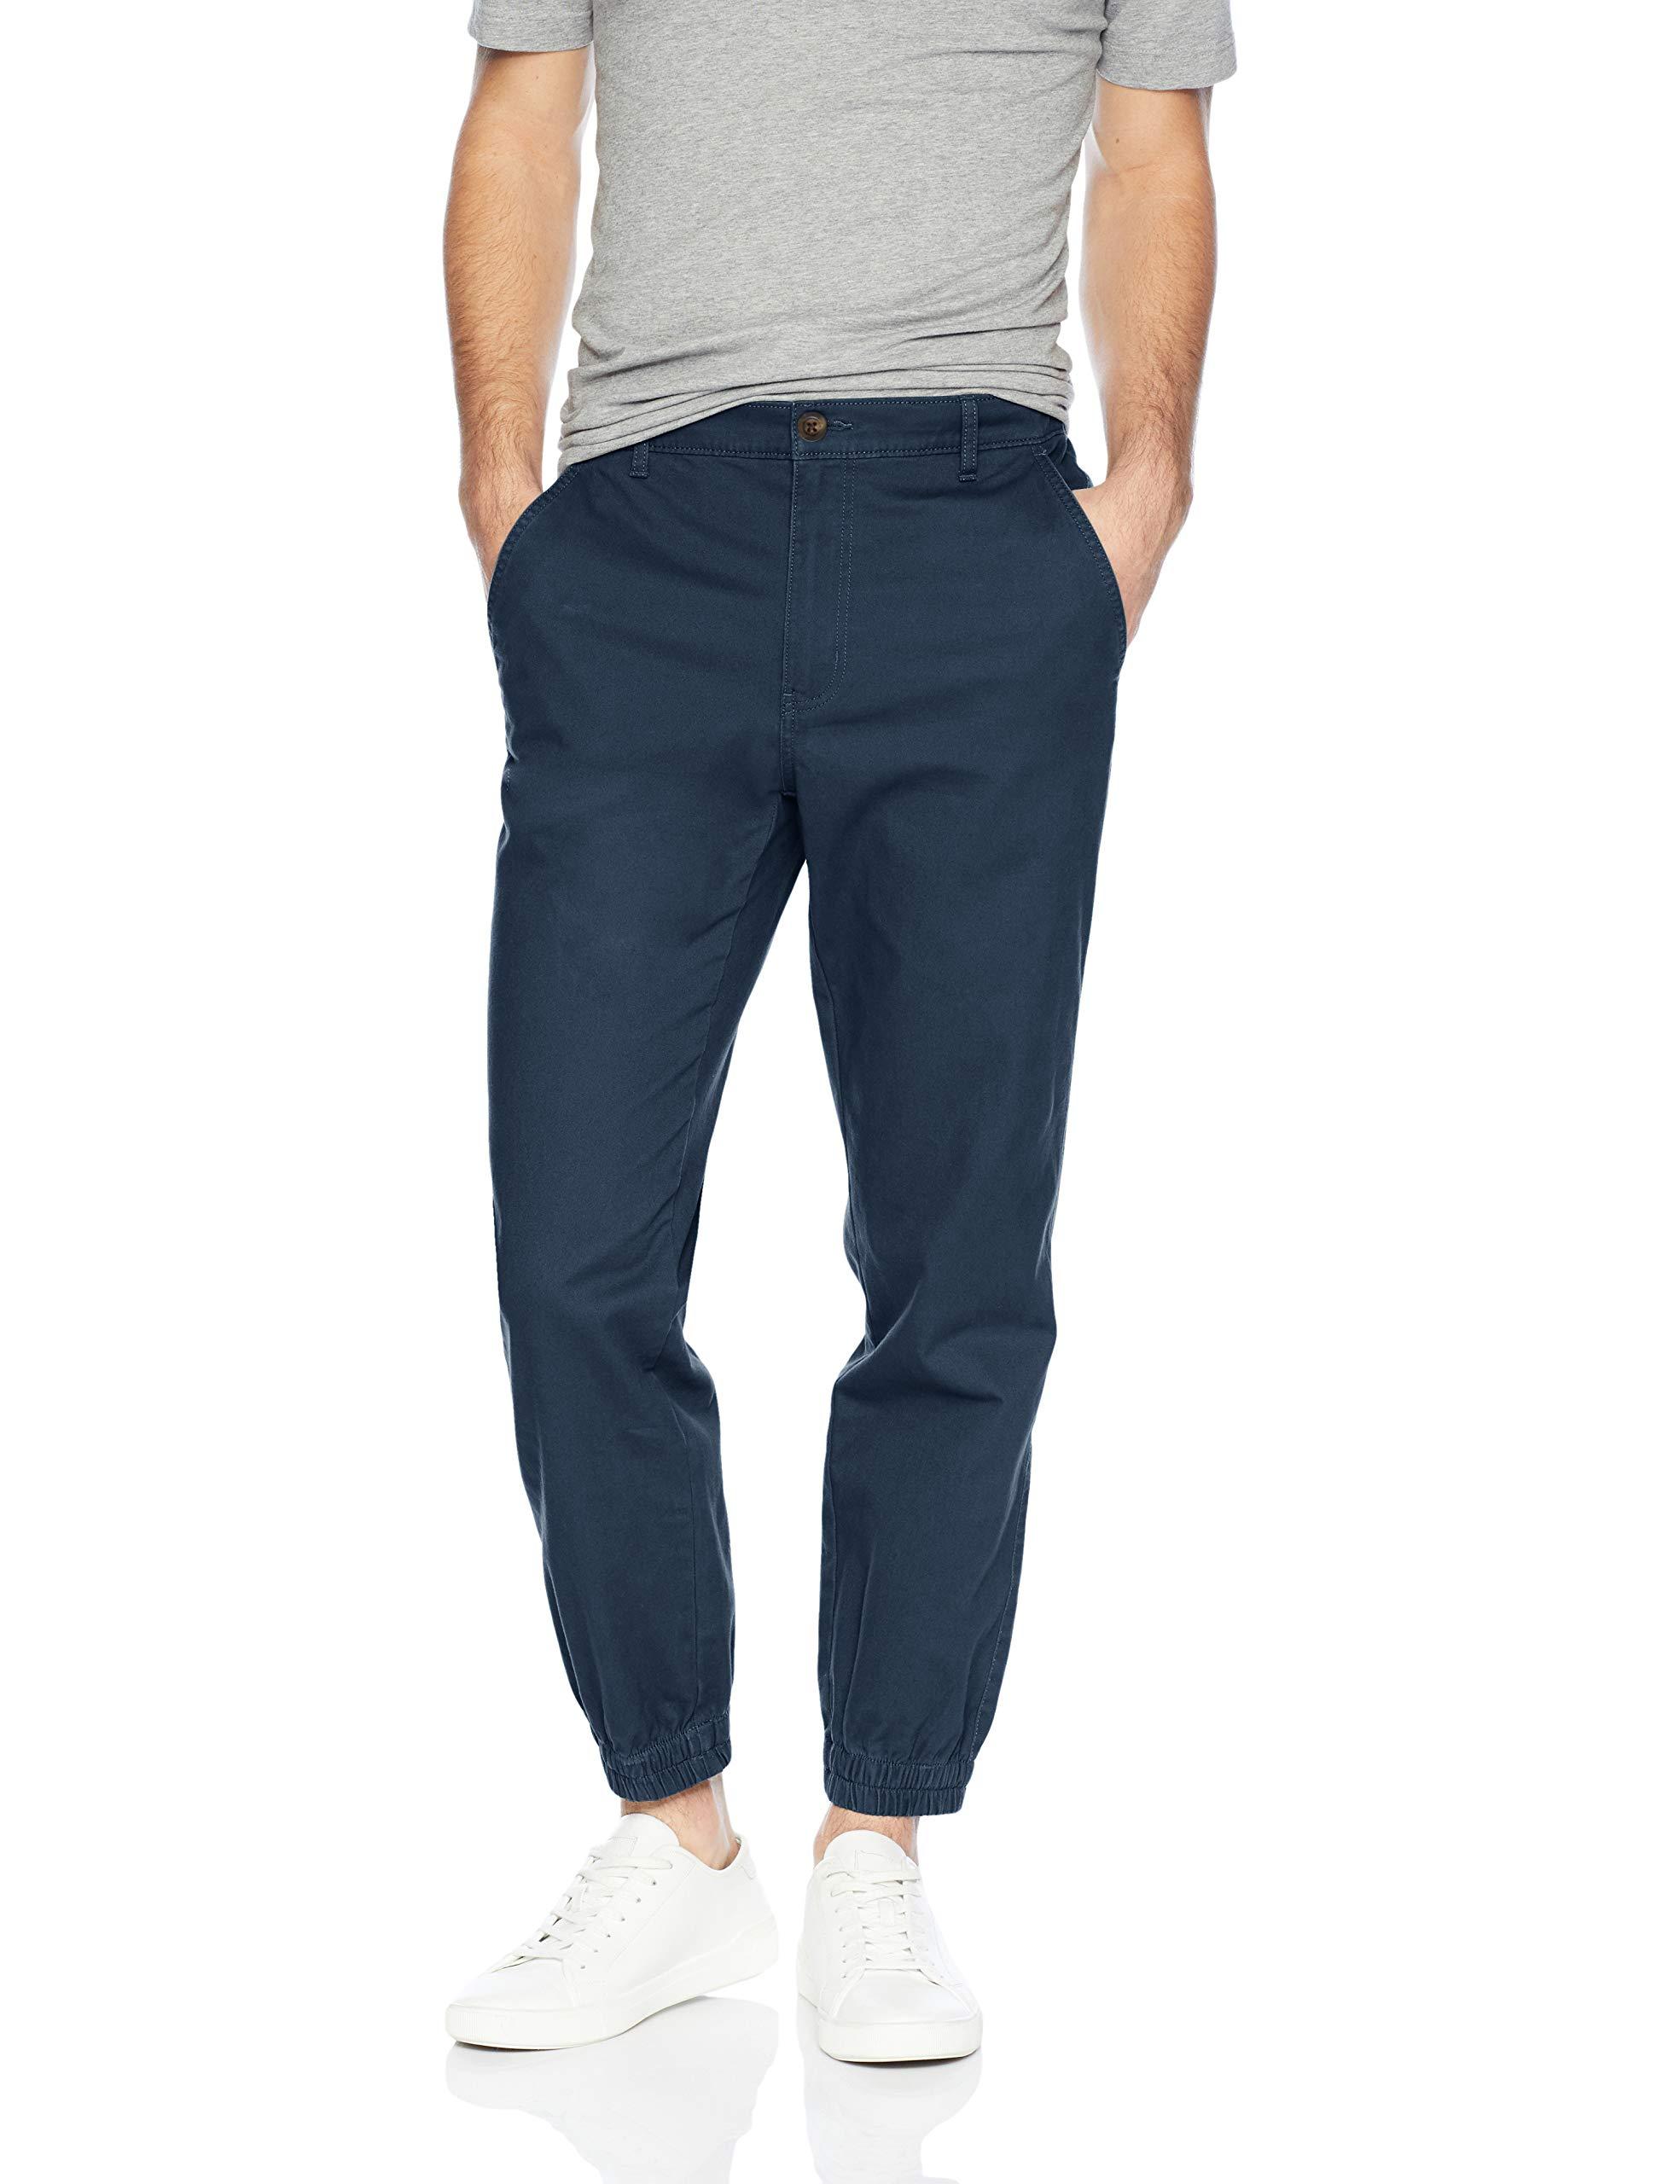 Amazon Essentials Straight-fit Jogger Pant in Navy (Blue) for Men - Lyst